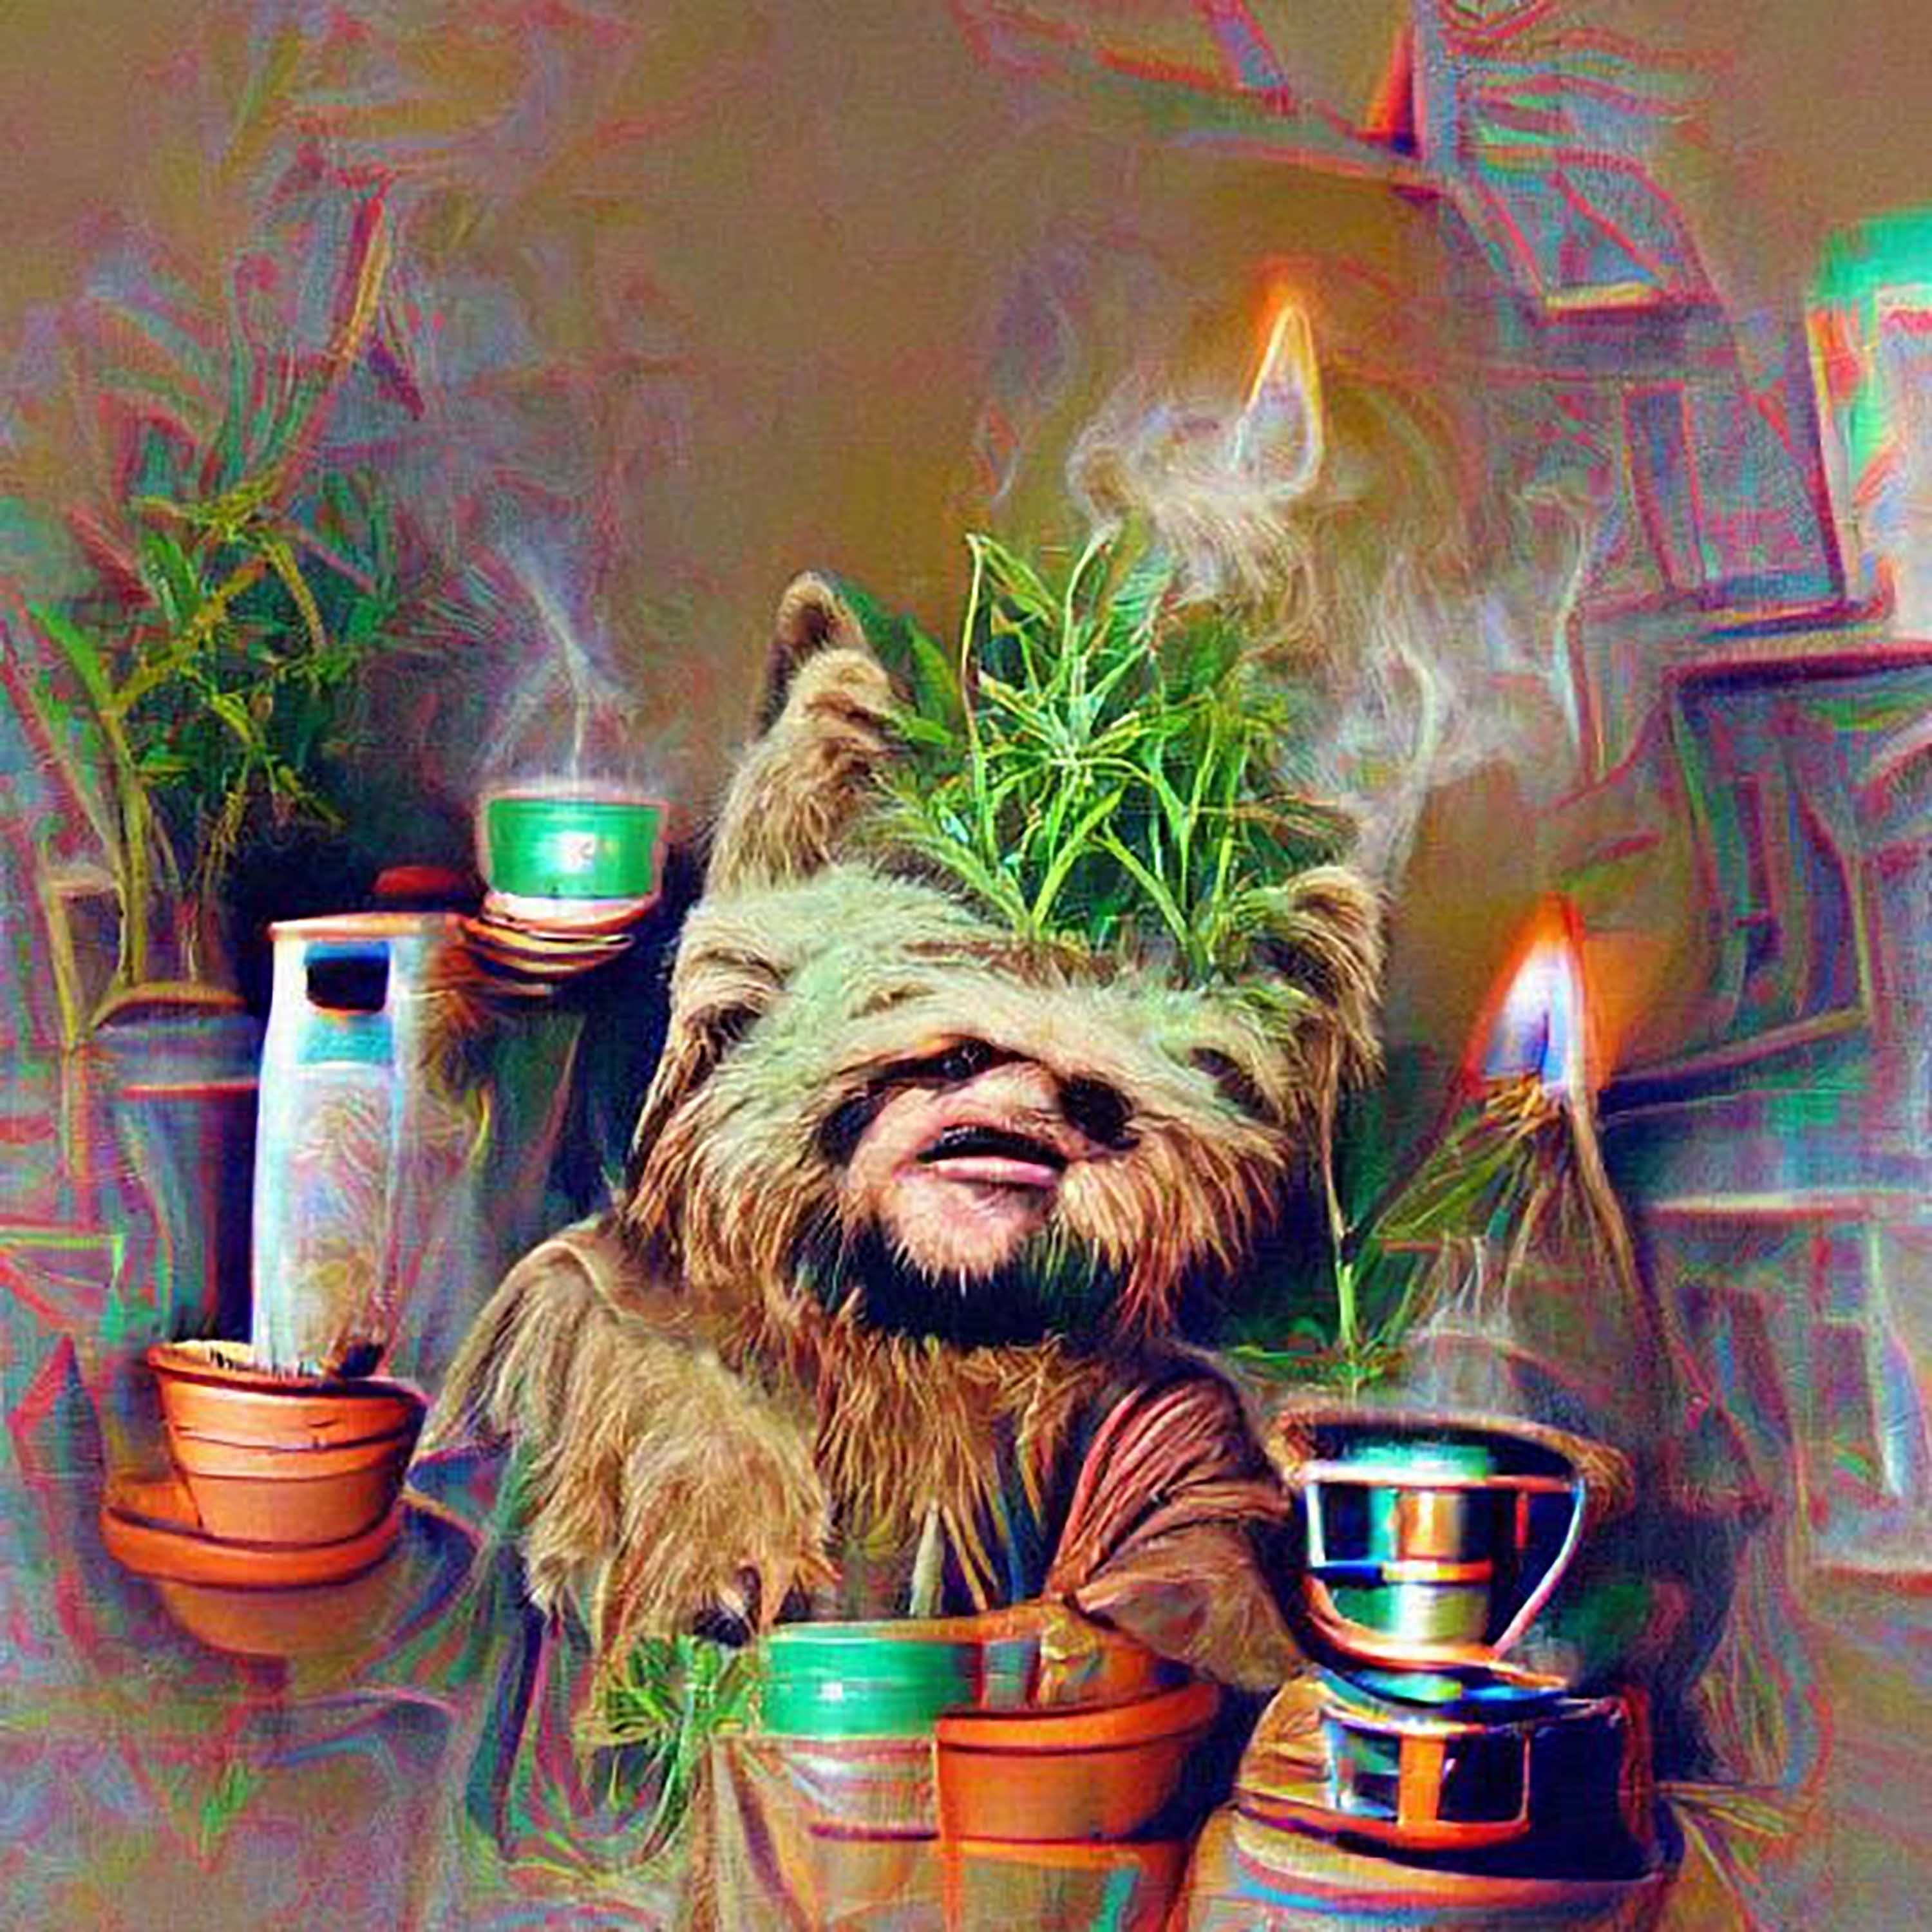 #105 - "Light the green pot, this herb is hairy like Wicket the Ewok from when the Jedi returns, bright headlights can burn the roadway, with the Old Ways birth the Golden Days Divine, folding space and time"